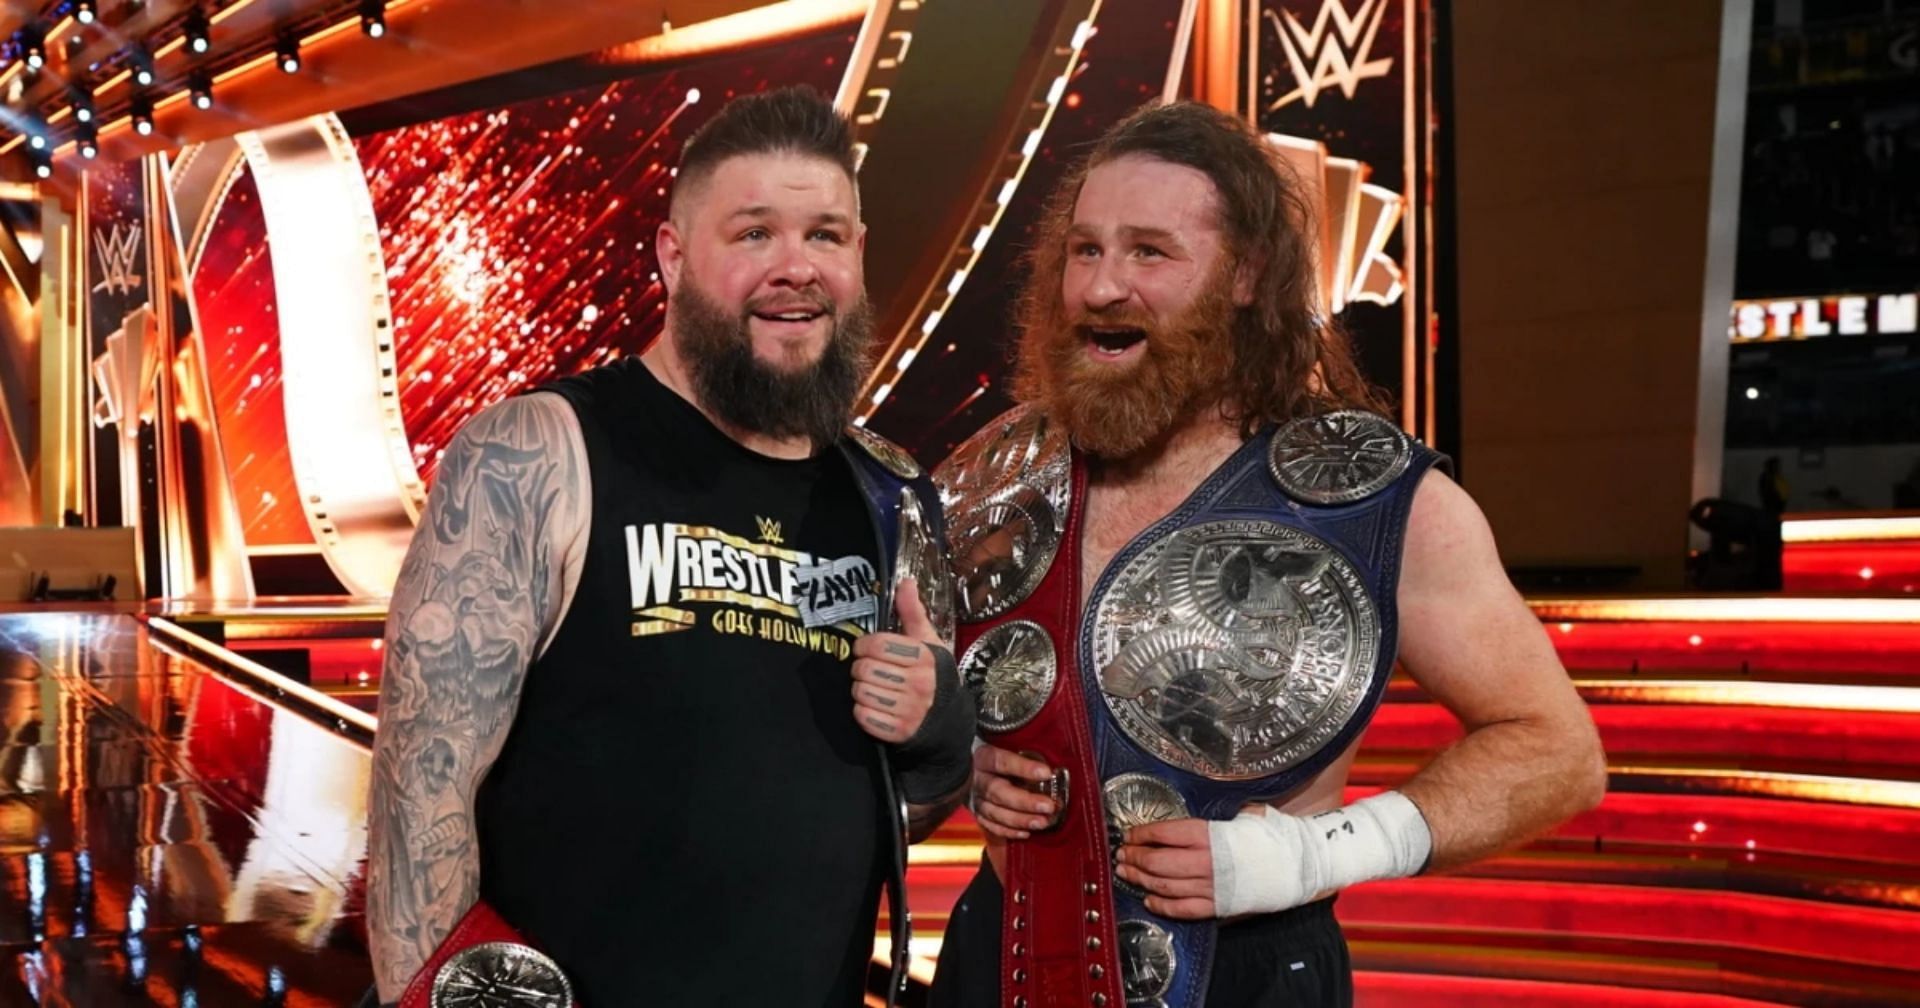 Kevin Owens and Sami Zayn are the new Undisputed WWE Tag Team Champions